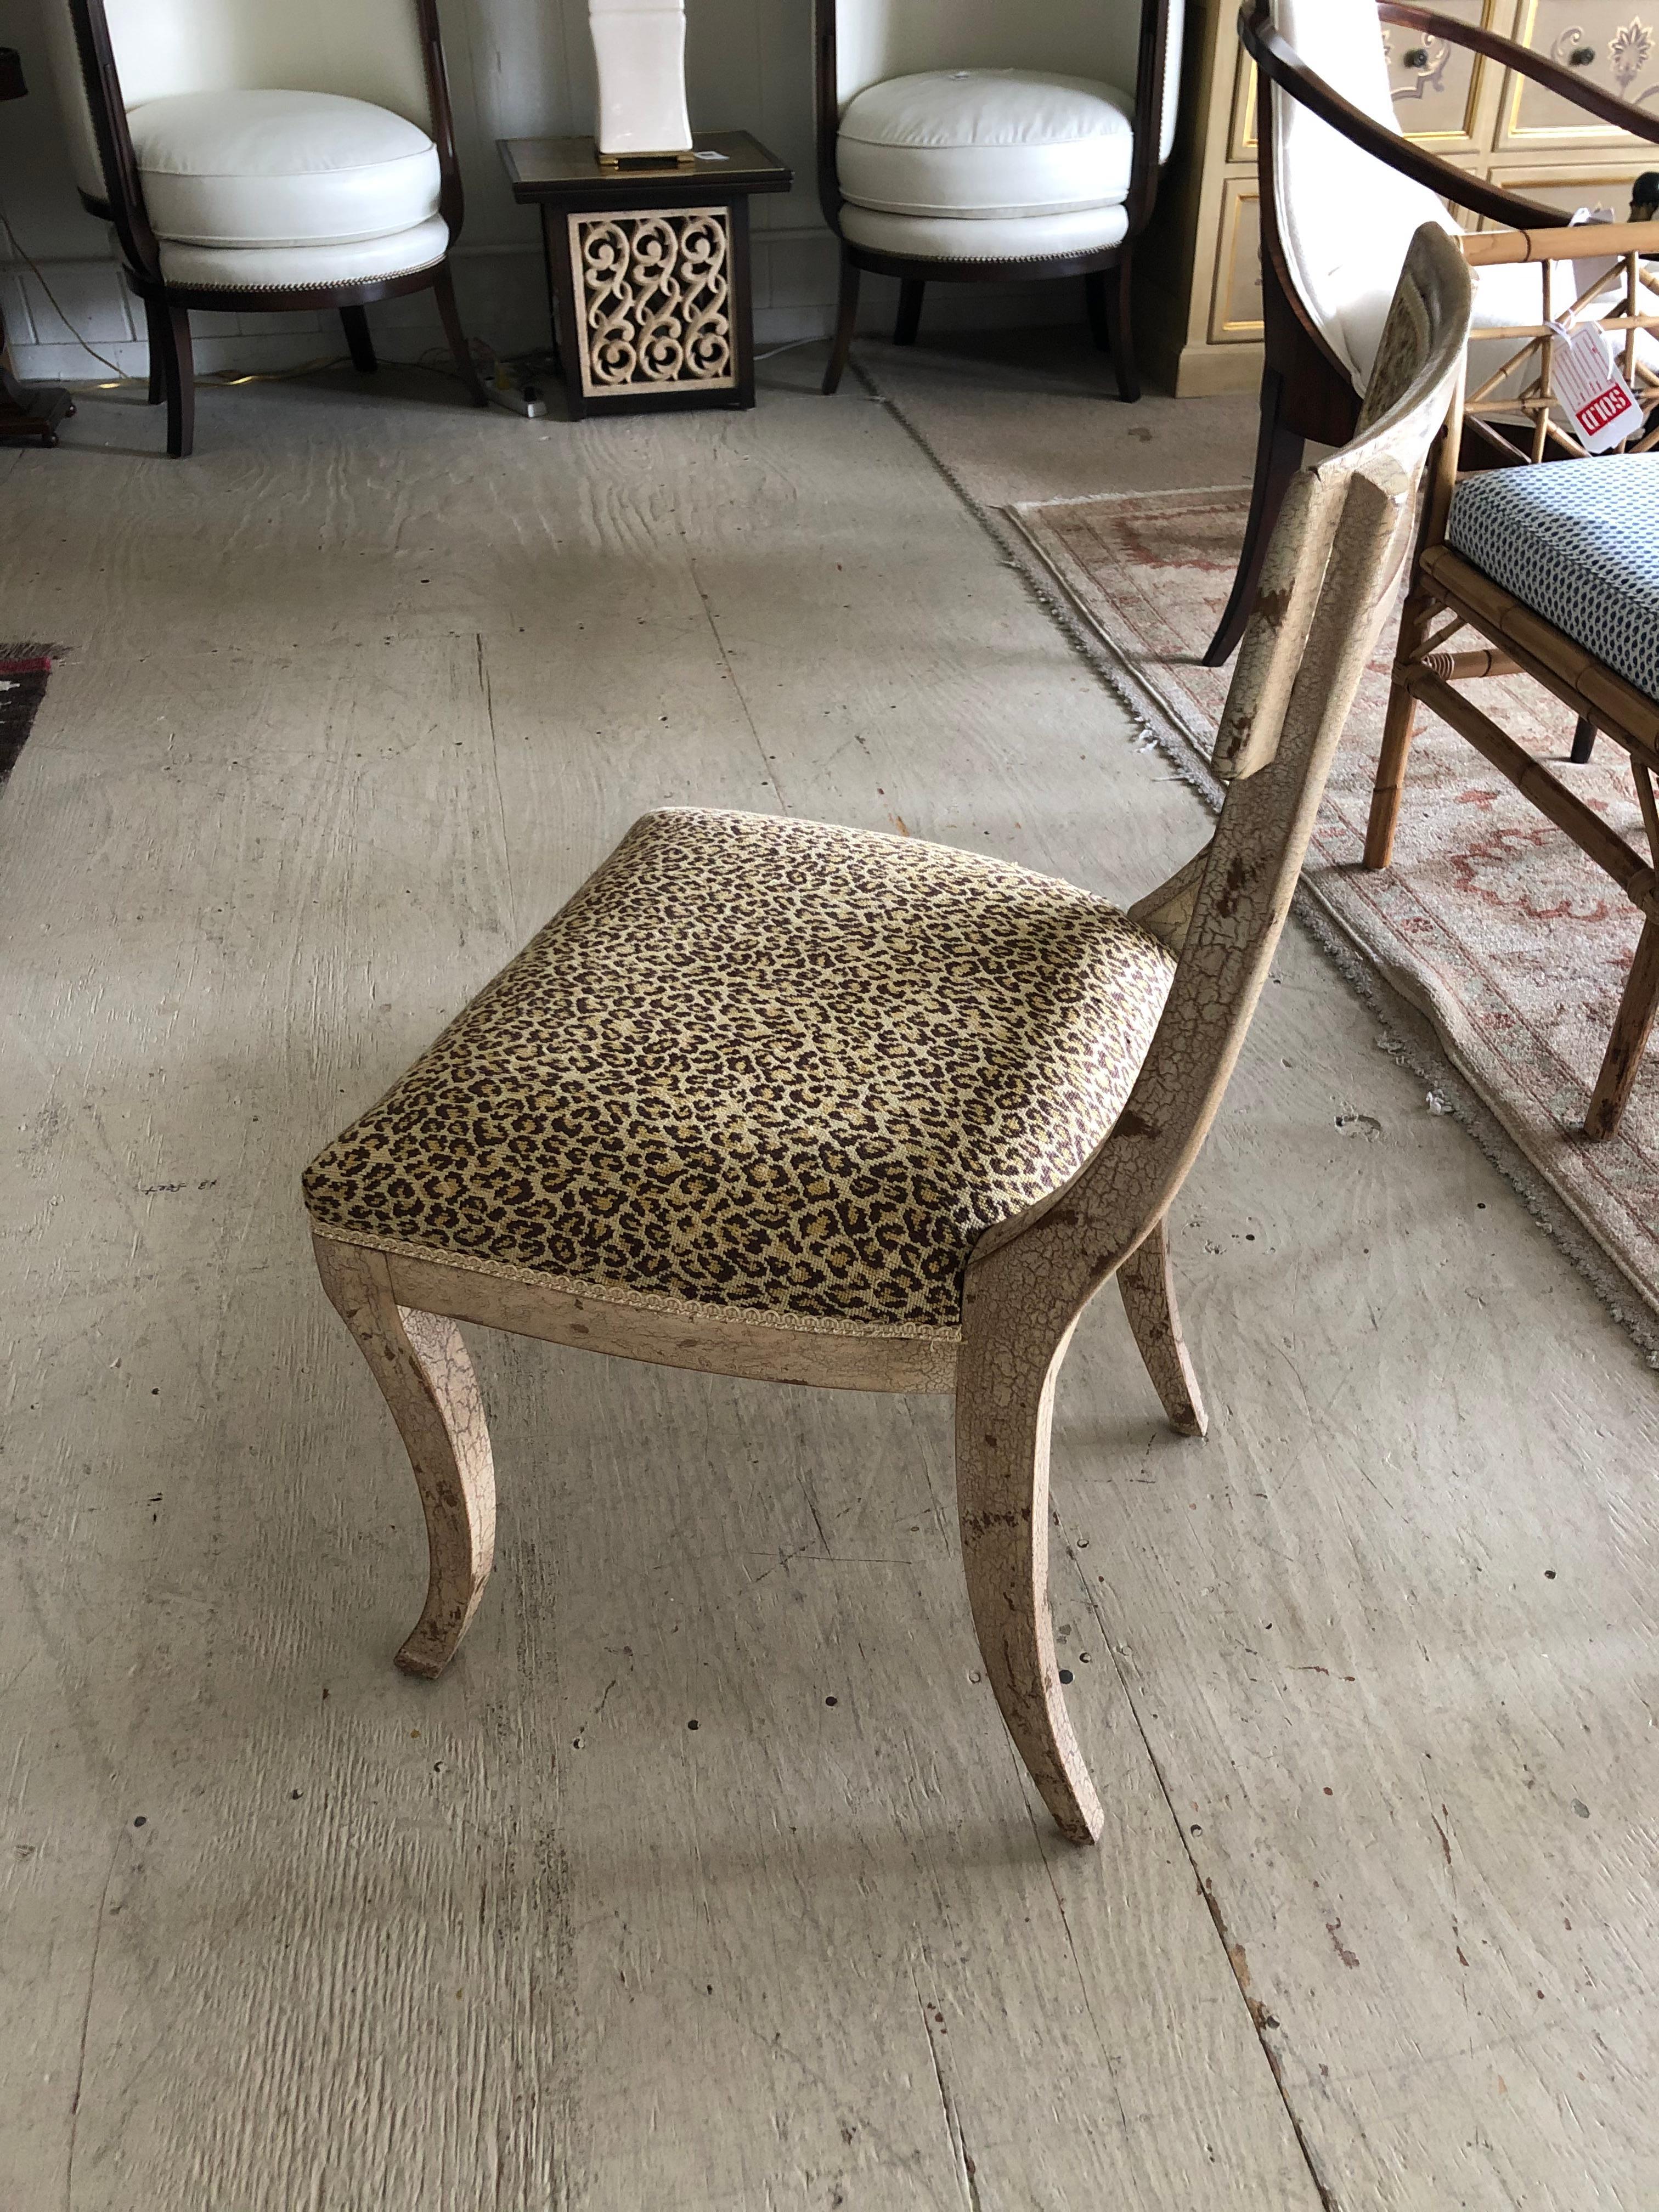 Stylish Painted Distressed Desk Chair with Faux Leopard Upholstery 3